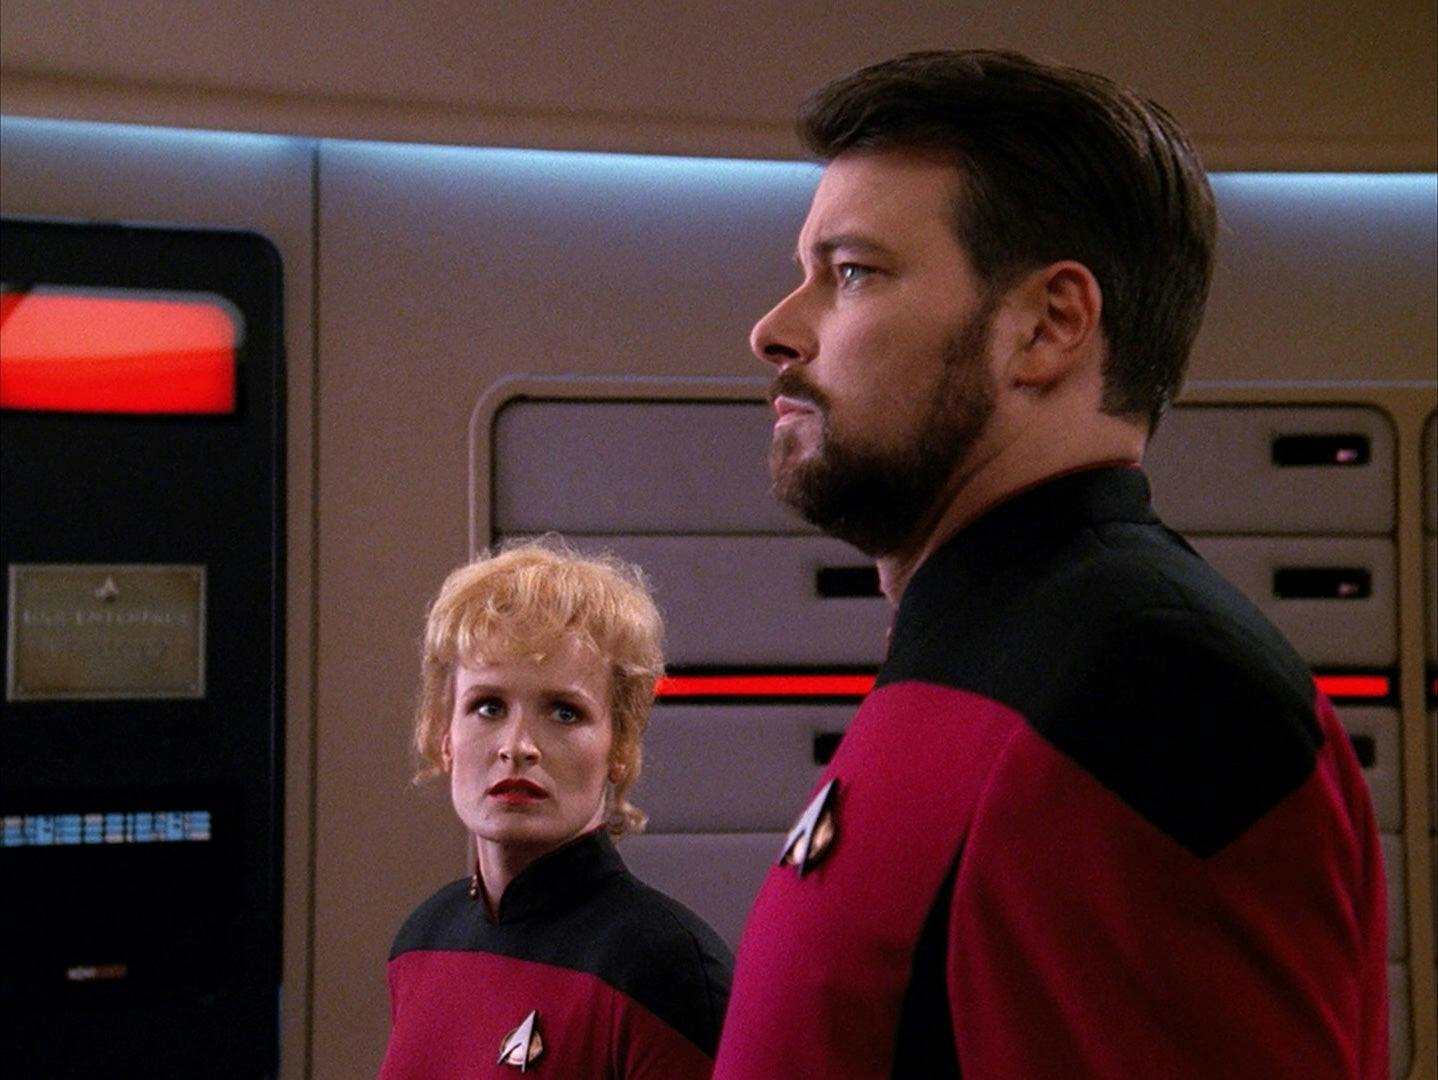 Shelby looks over to Will Riker who gravely looks at the viewscreen ahead of him in 'The Best of Both Worlds, Part I'